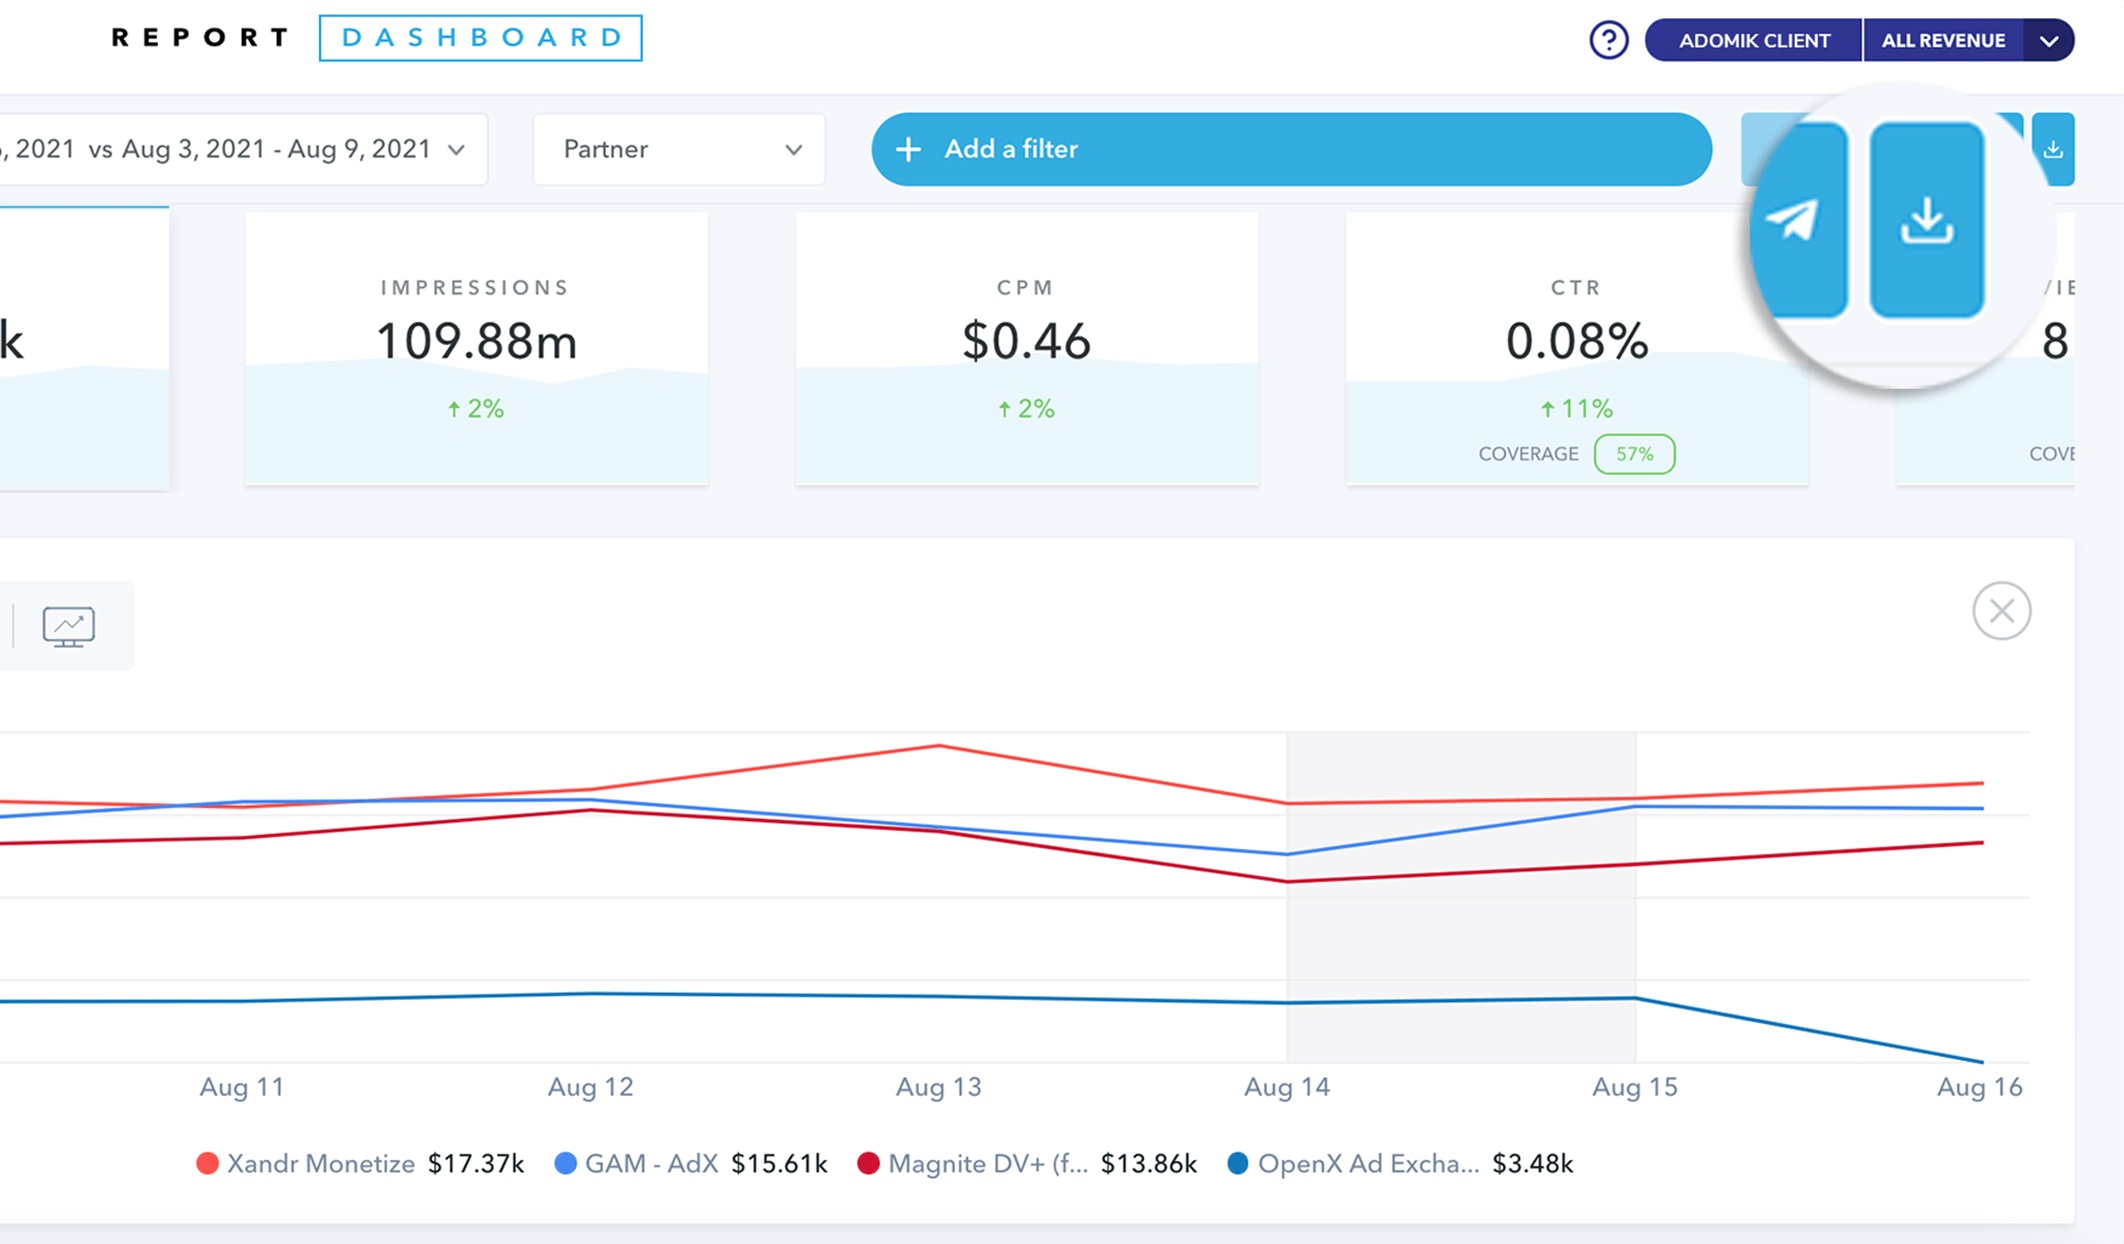 Share dynamically generated “Post-campaign” and “End-of-month” reports with your clients